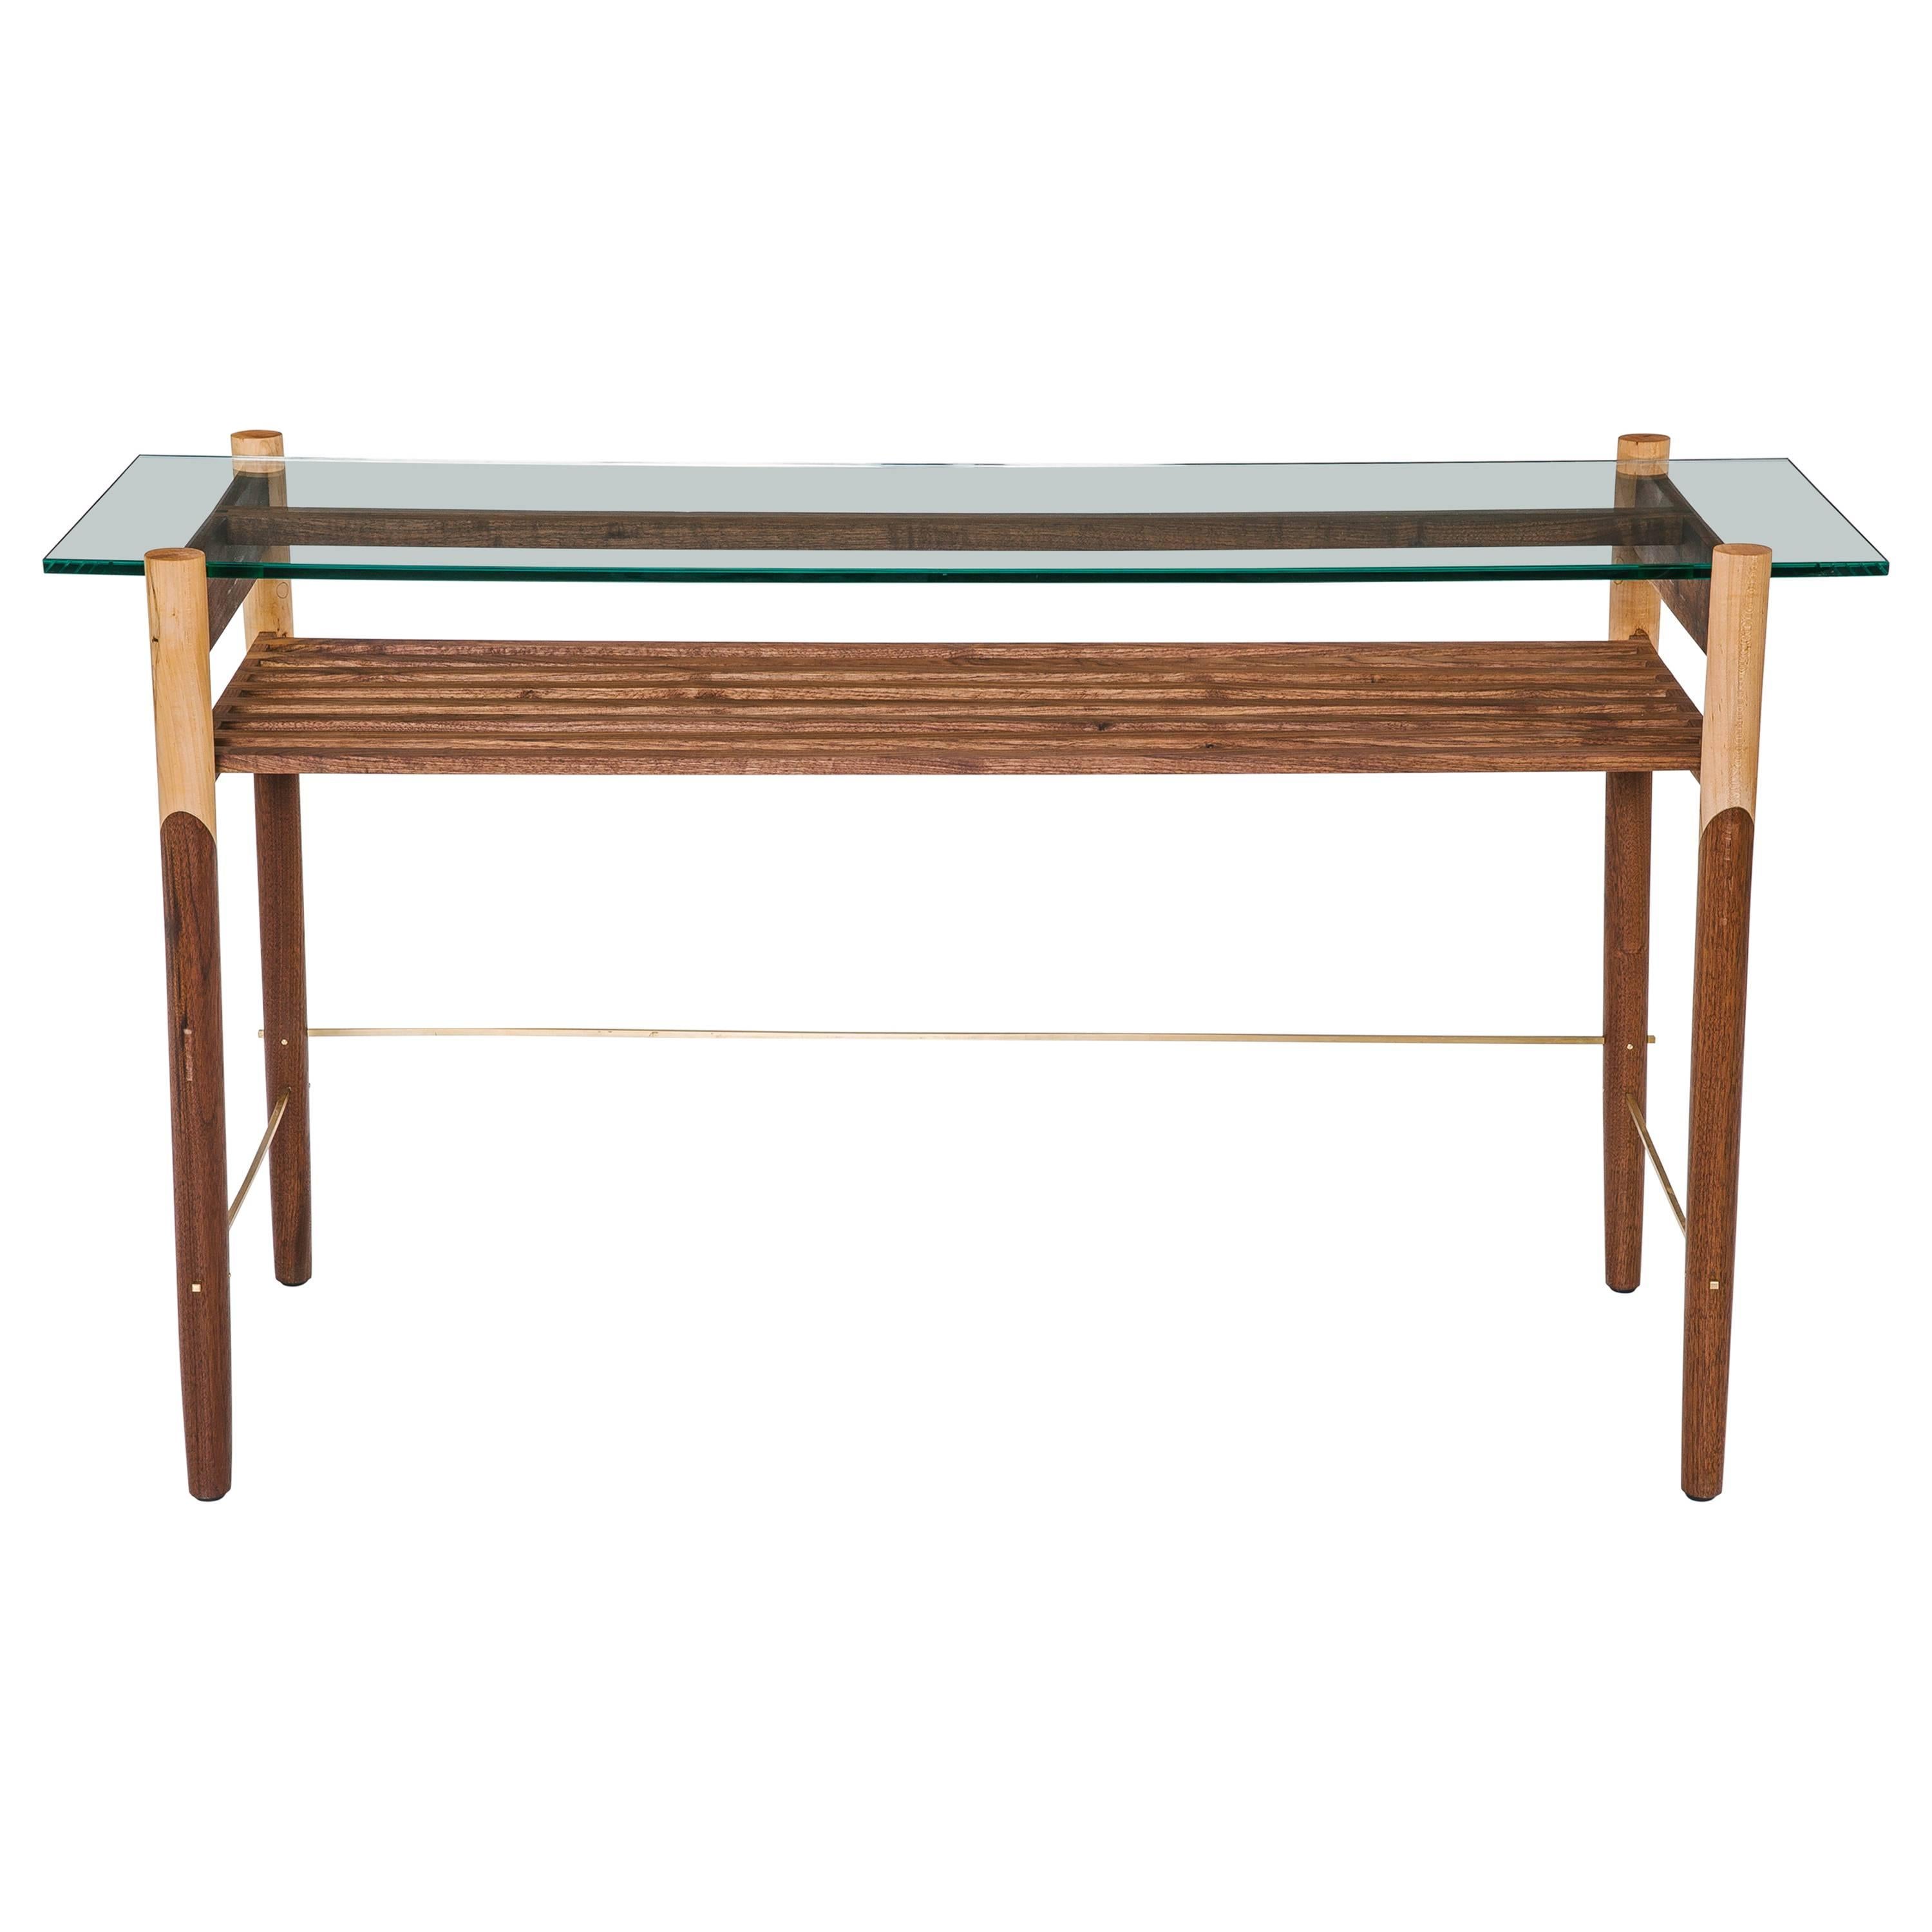 Hand-turned solid wood base. Polished tempered glass top. Fine metal accents. Handmade in Los Angeles, California.

Shown in walnut, maple and brass with clear tempered glass.   

Wood type is available in ebonized oak, white oak, solid walnut,